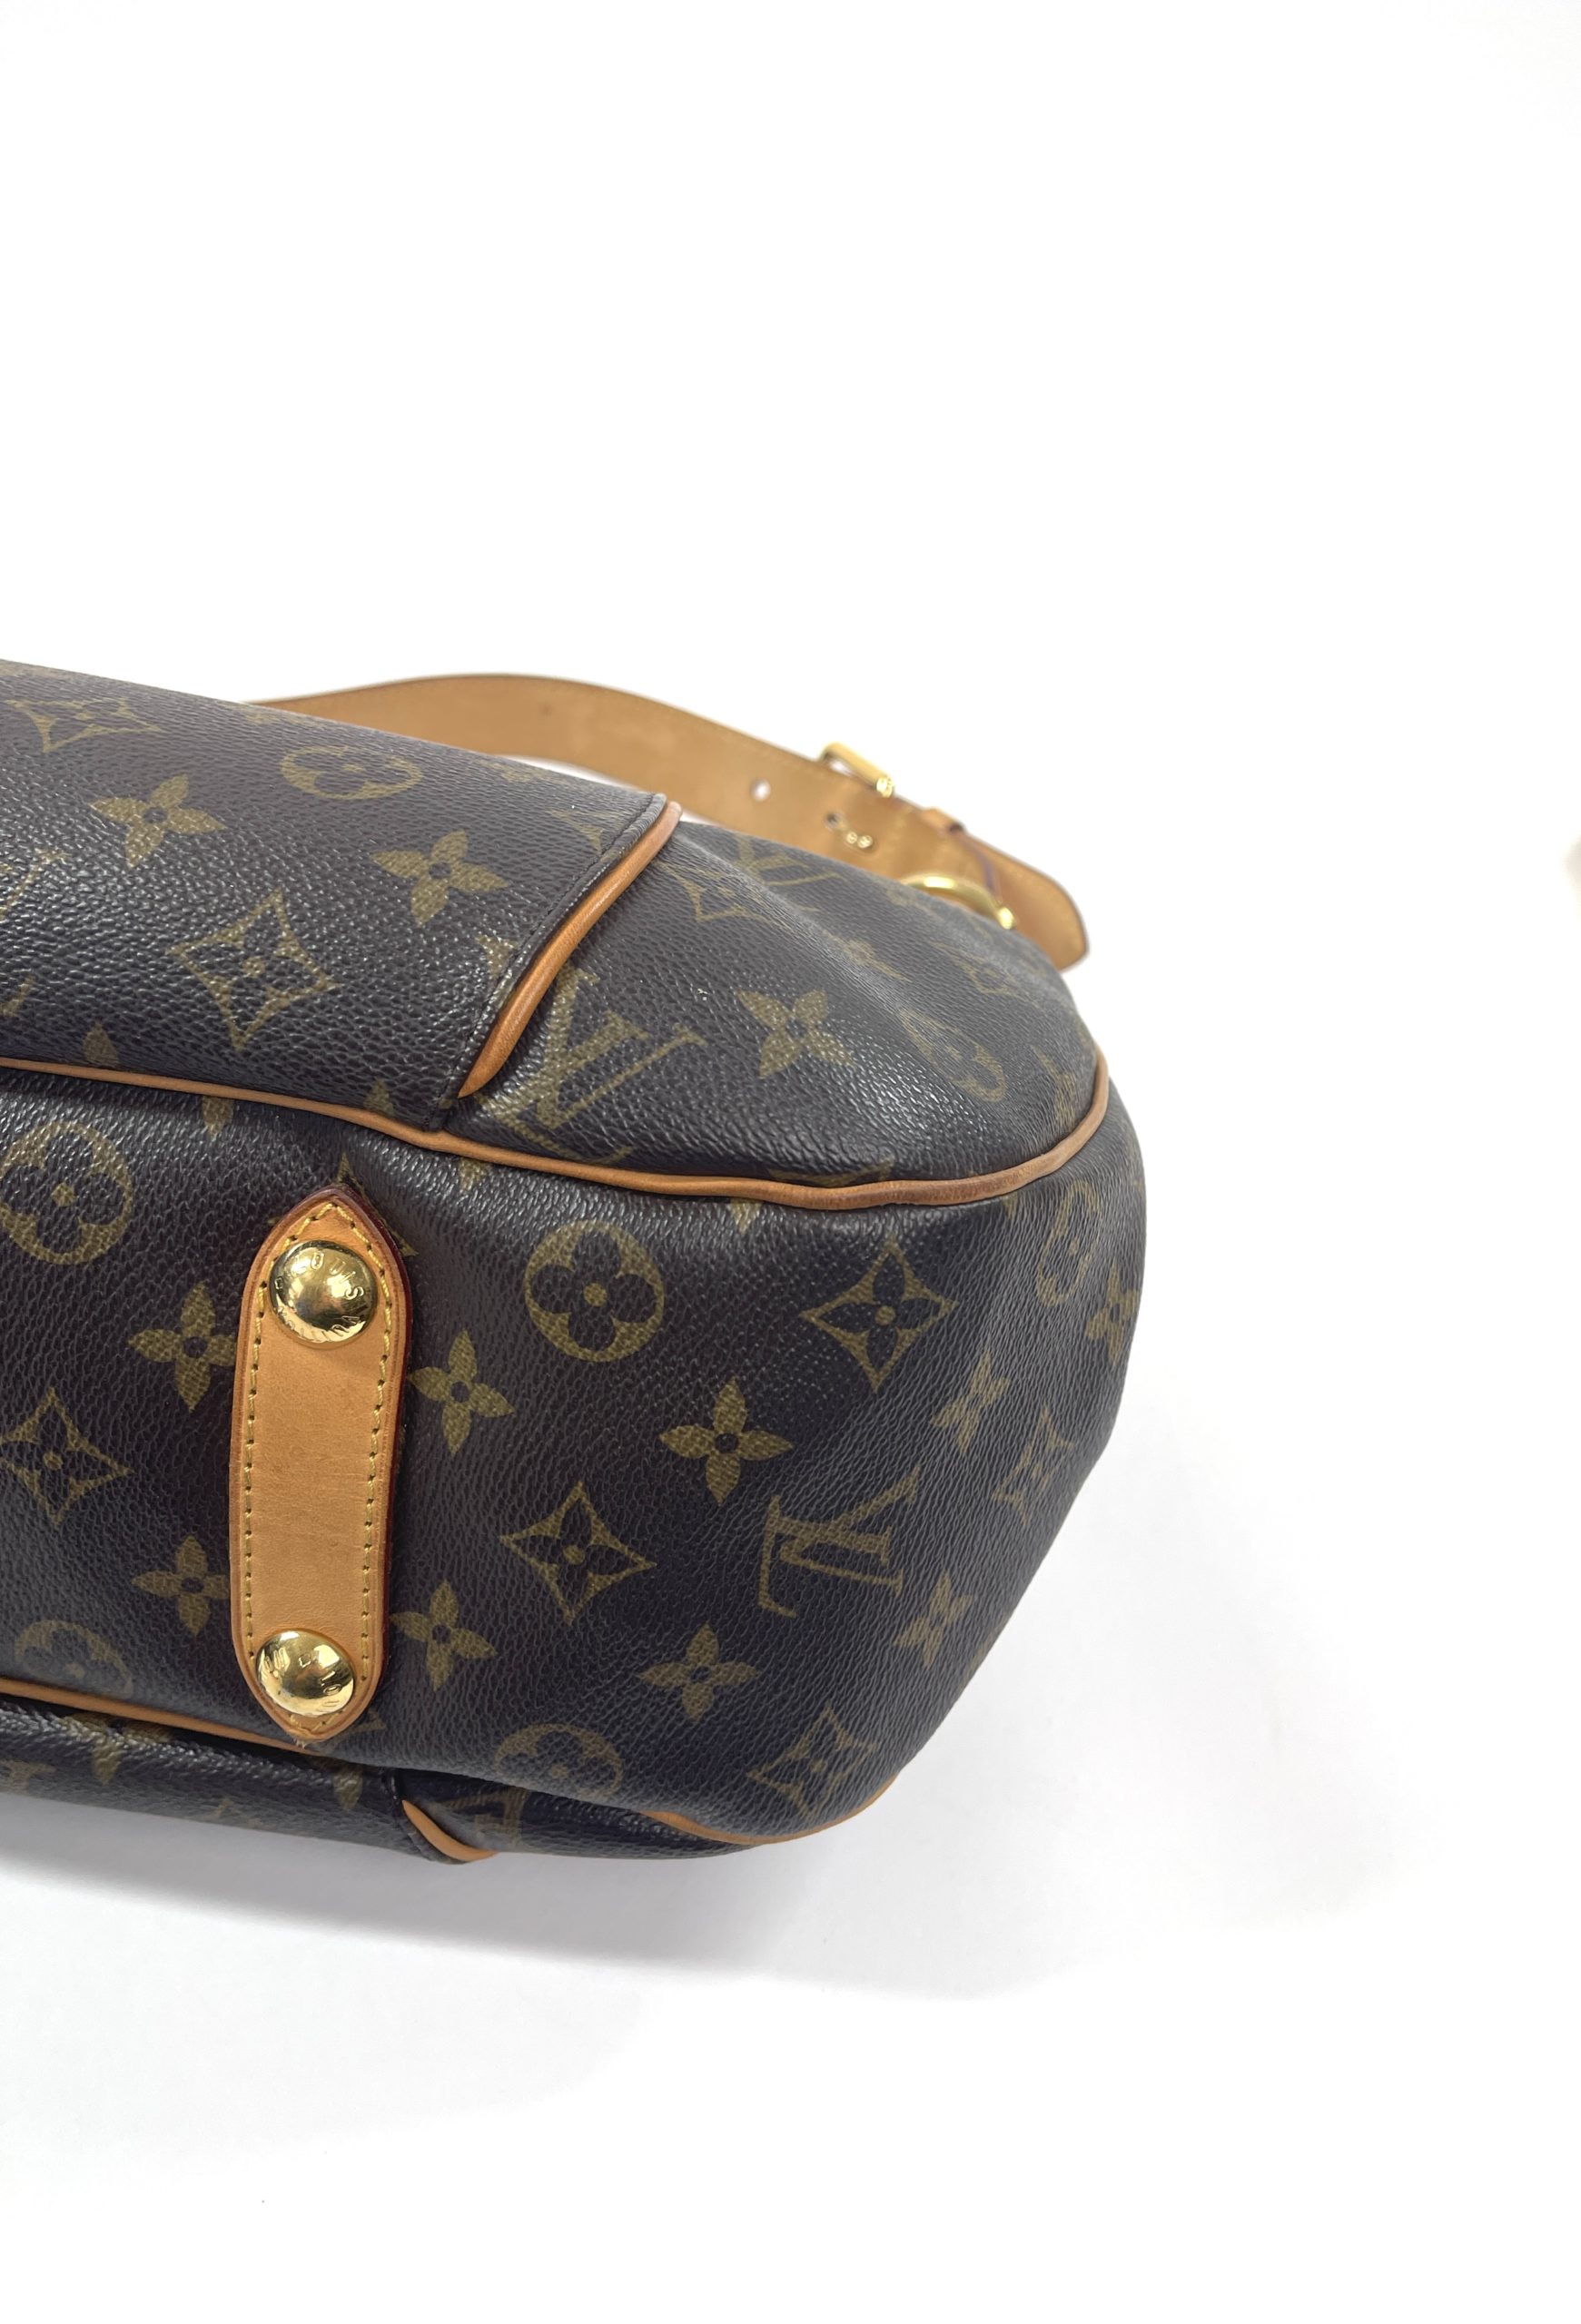 Louis Vuitton Vintage Stephen Sprouse Grey And Brown Monogram